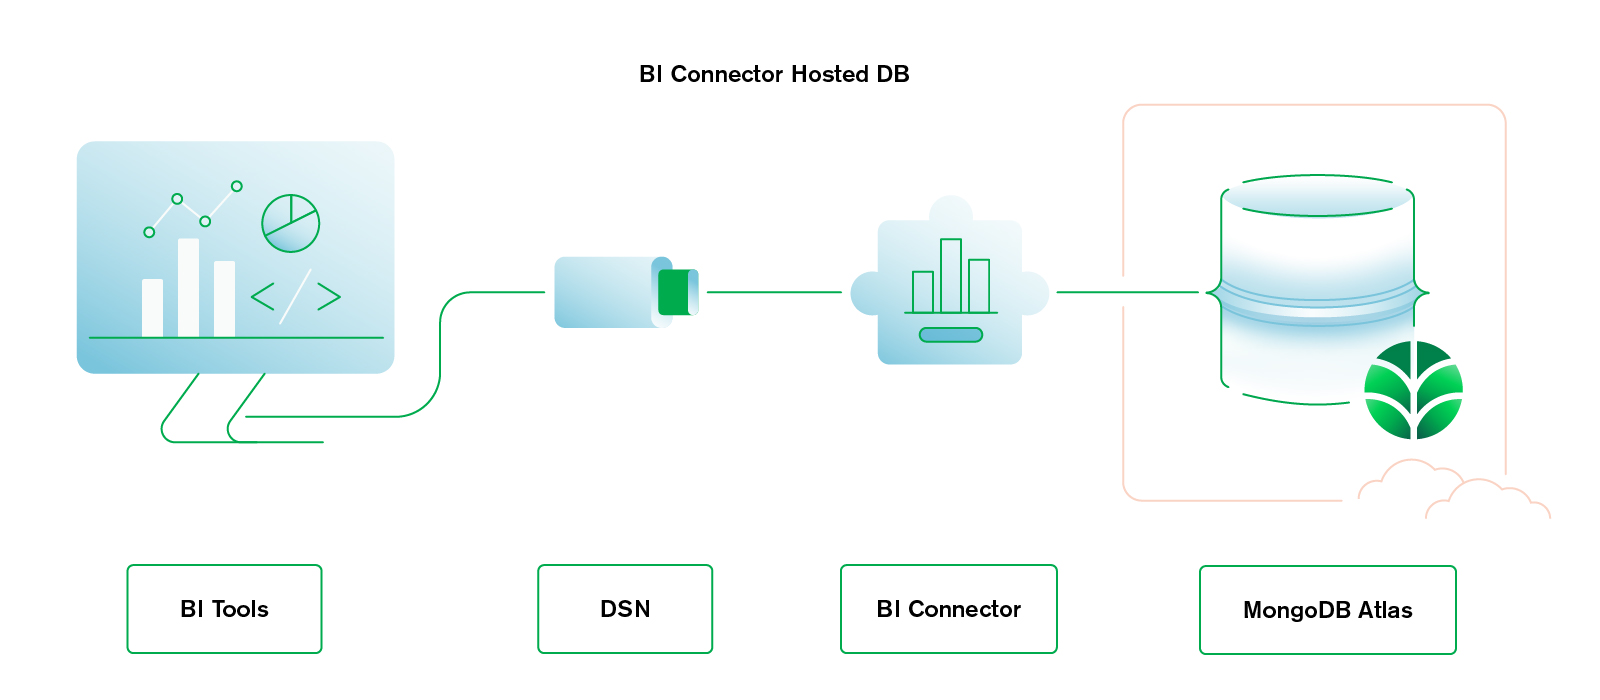 Hosted DB and Self-Managed BI Connector